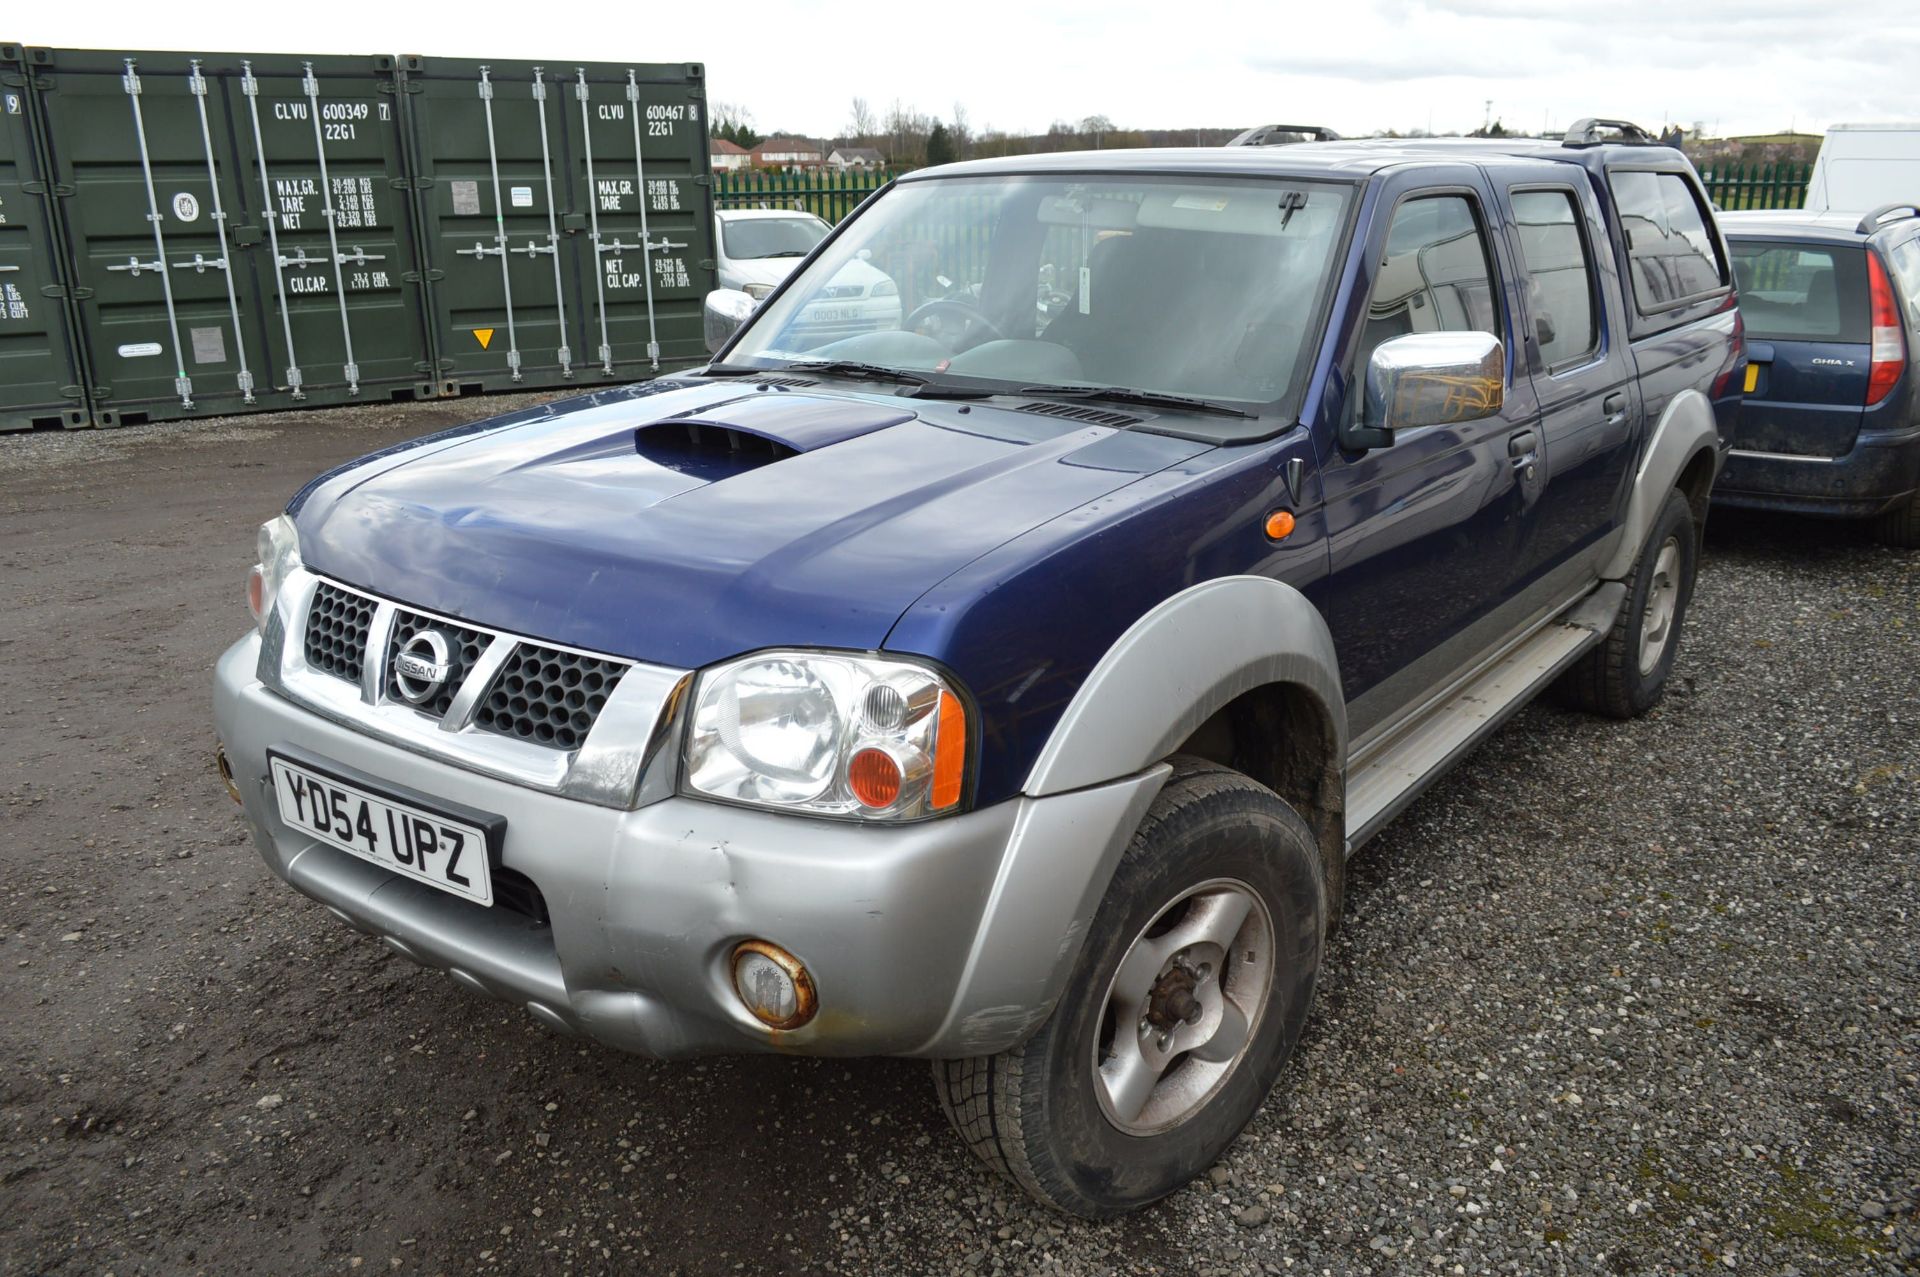 Nissan Crew Cab Pickup, registration no. YD54 UPZ, indicated miles 211,742 (at time of listing), - Image 2 of 4